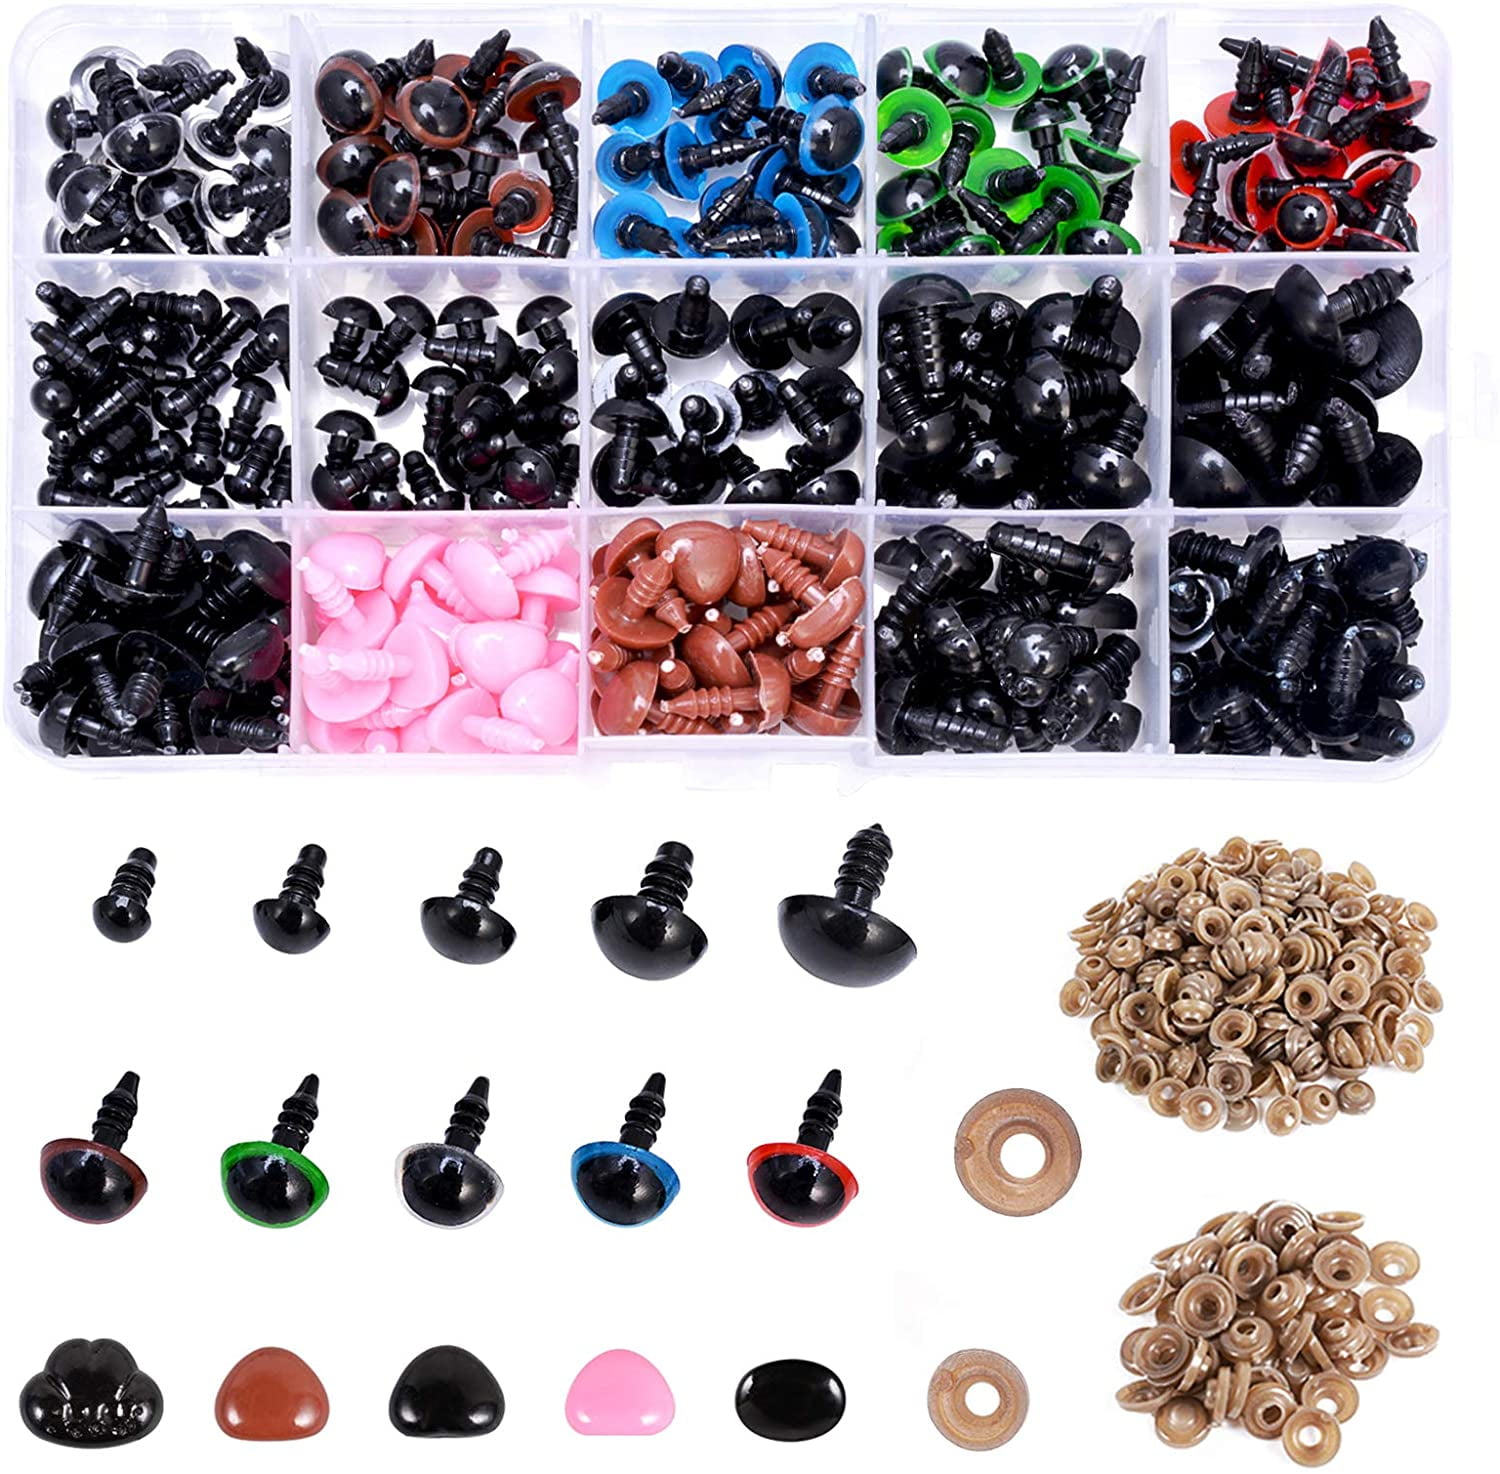 Safety Eyes 796pcs Plastic Safety Eyes and Noses, 6-20mm Black Craft Doll  Eyes with Washers Assorted Sizes Bear Nose for Plush Animal Crochet Bear